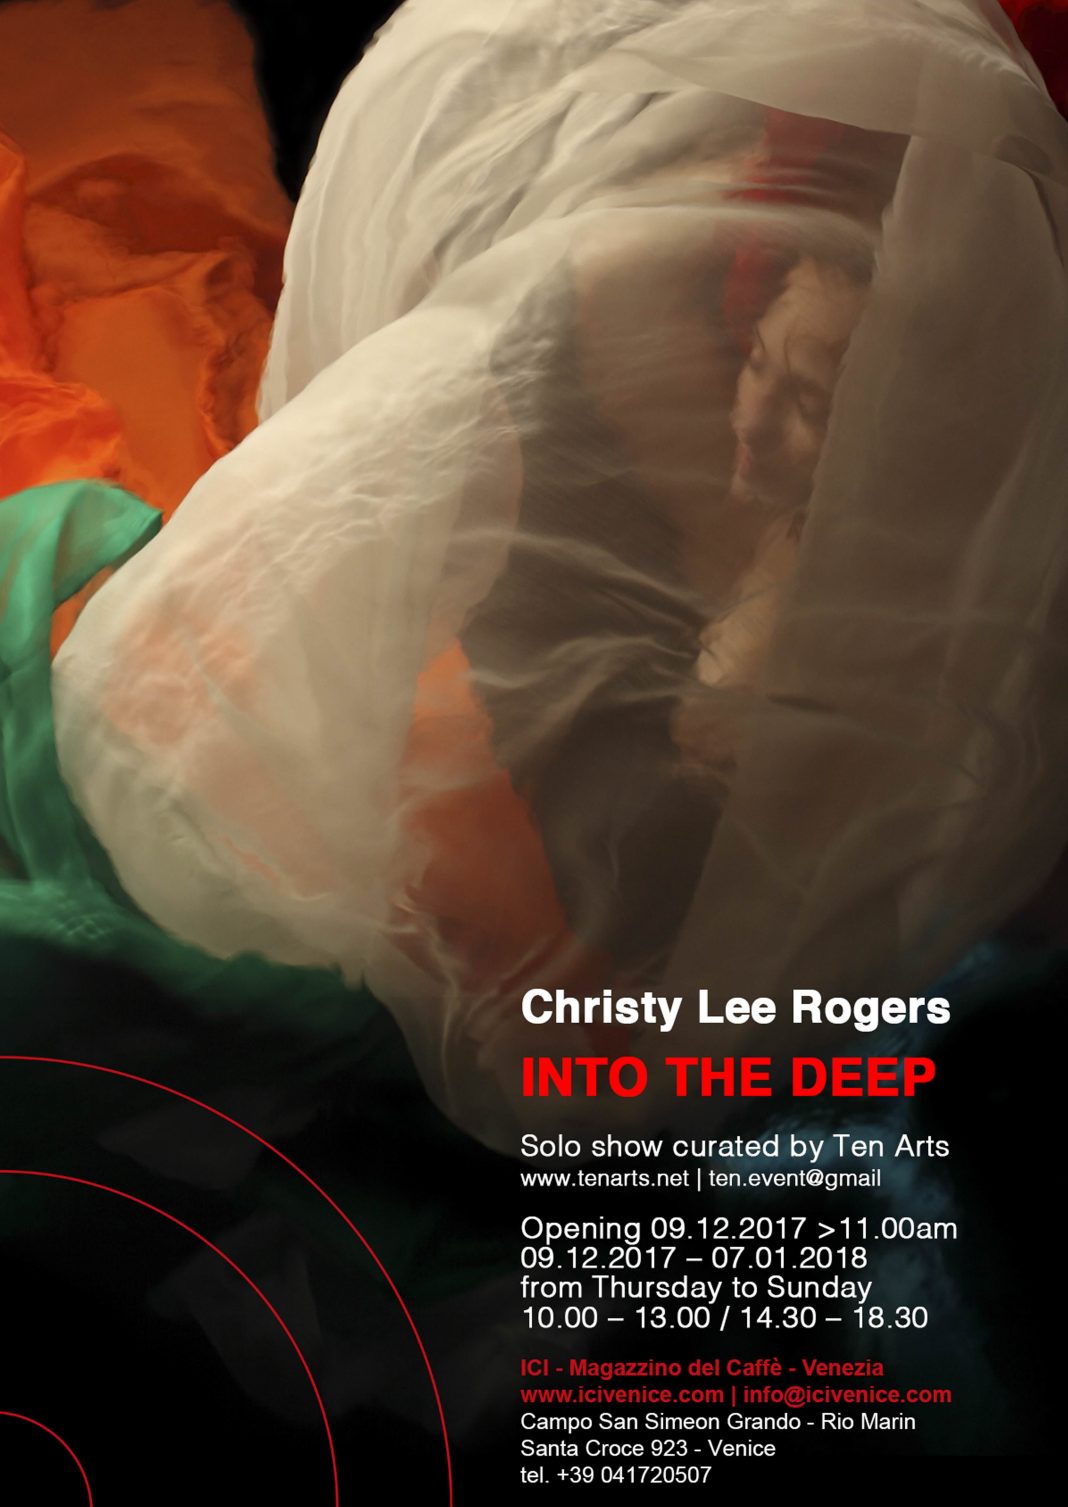 Christy Lee Rogers – Into the Deephttps://www.exibart.com/repository/media/eventi/2017/12/christy-lee-rogers-8211-into-the-deep-1068x1507.jpg